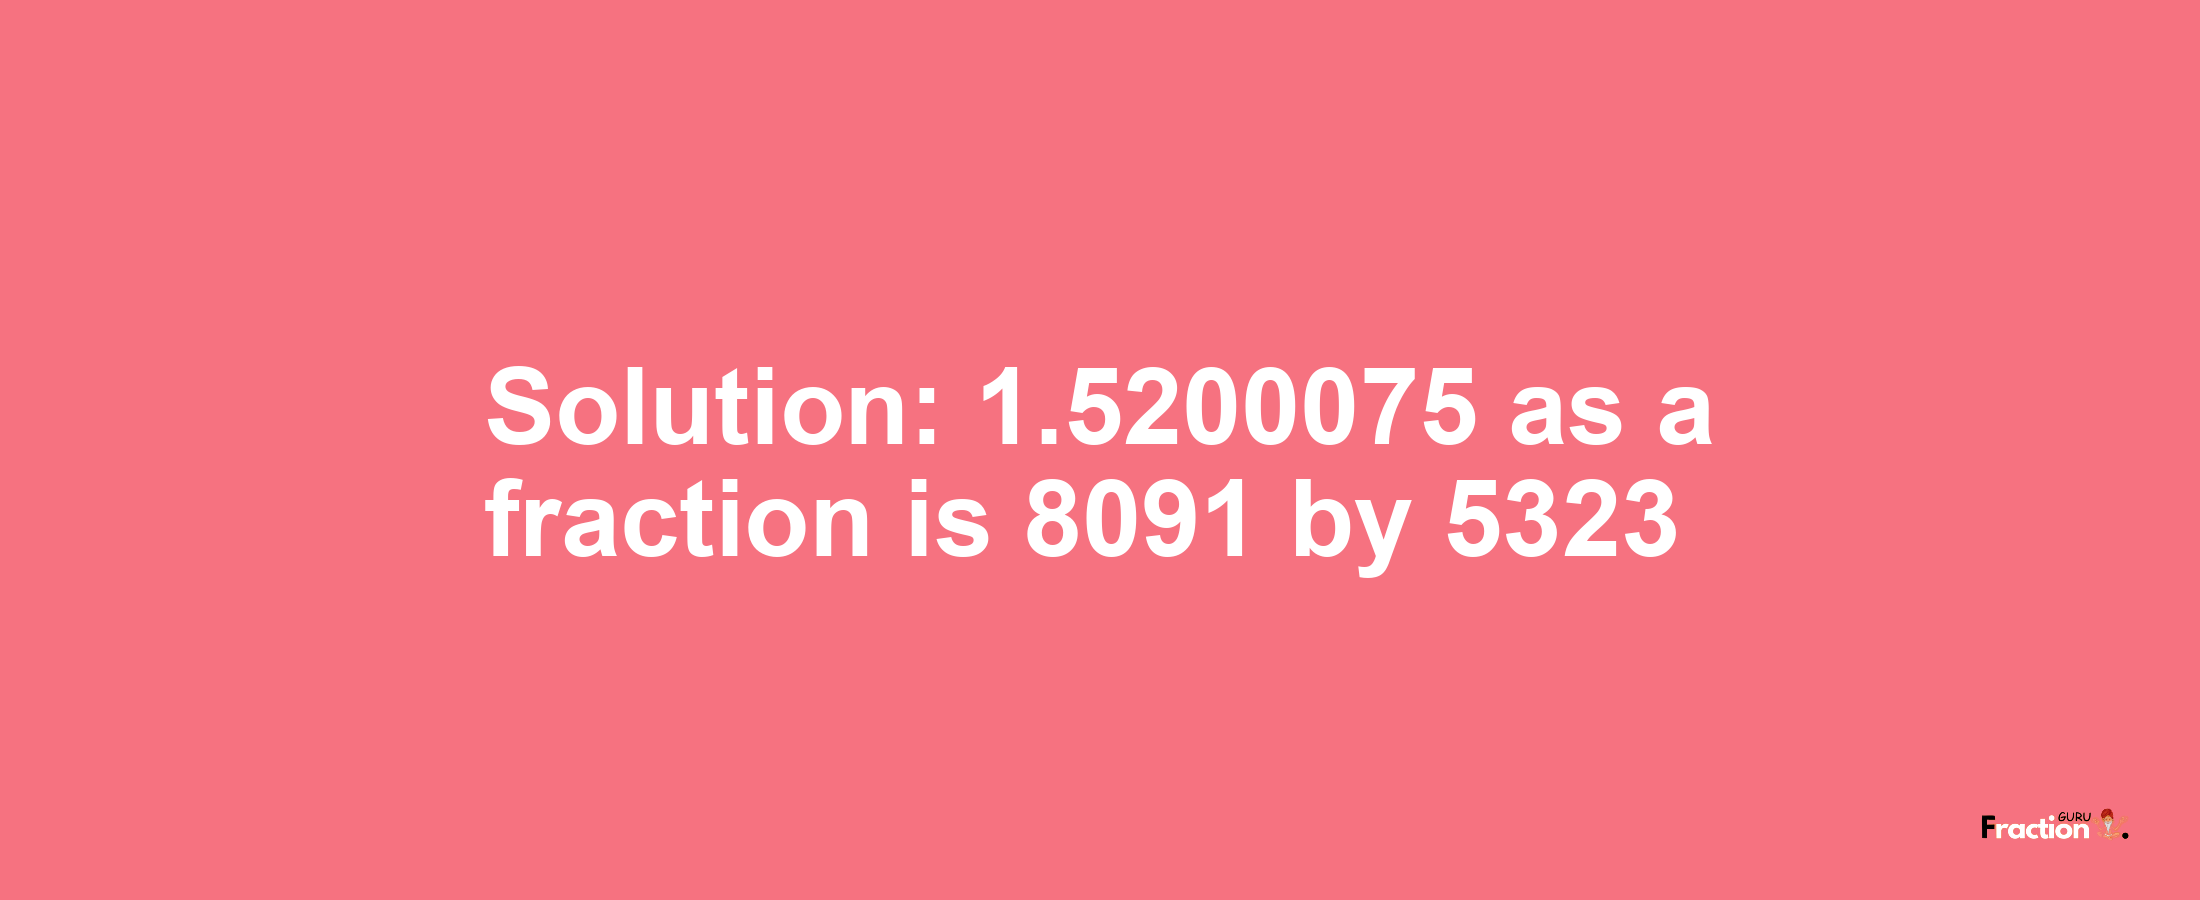 Solution:1.5200075 as a fraction is 8091/5323